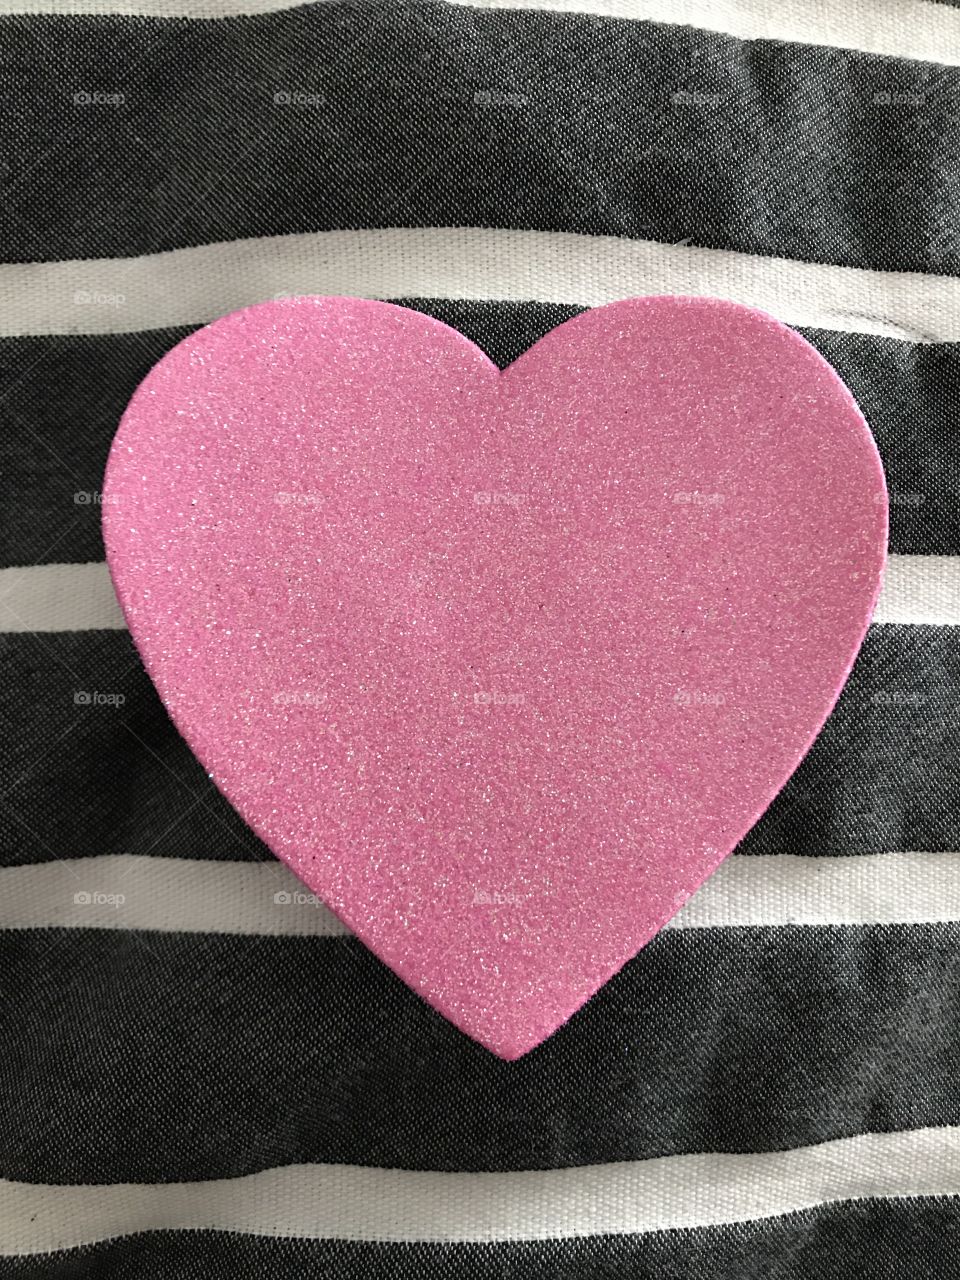 Close-up of a pink heart